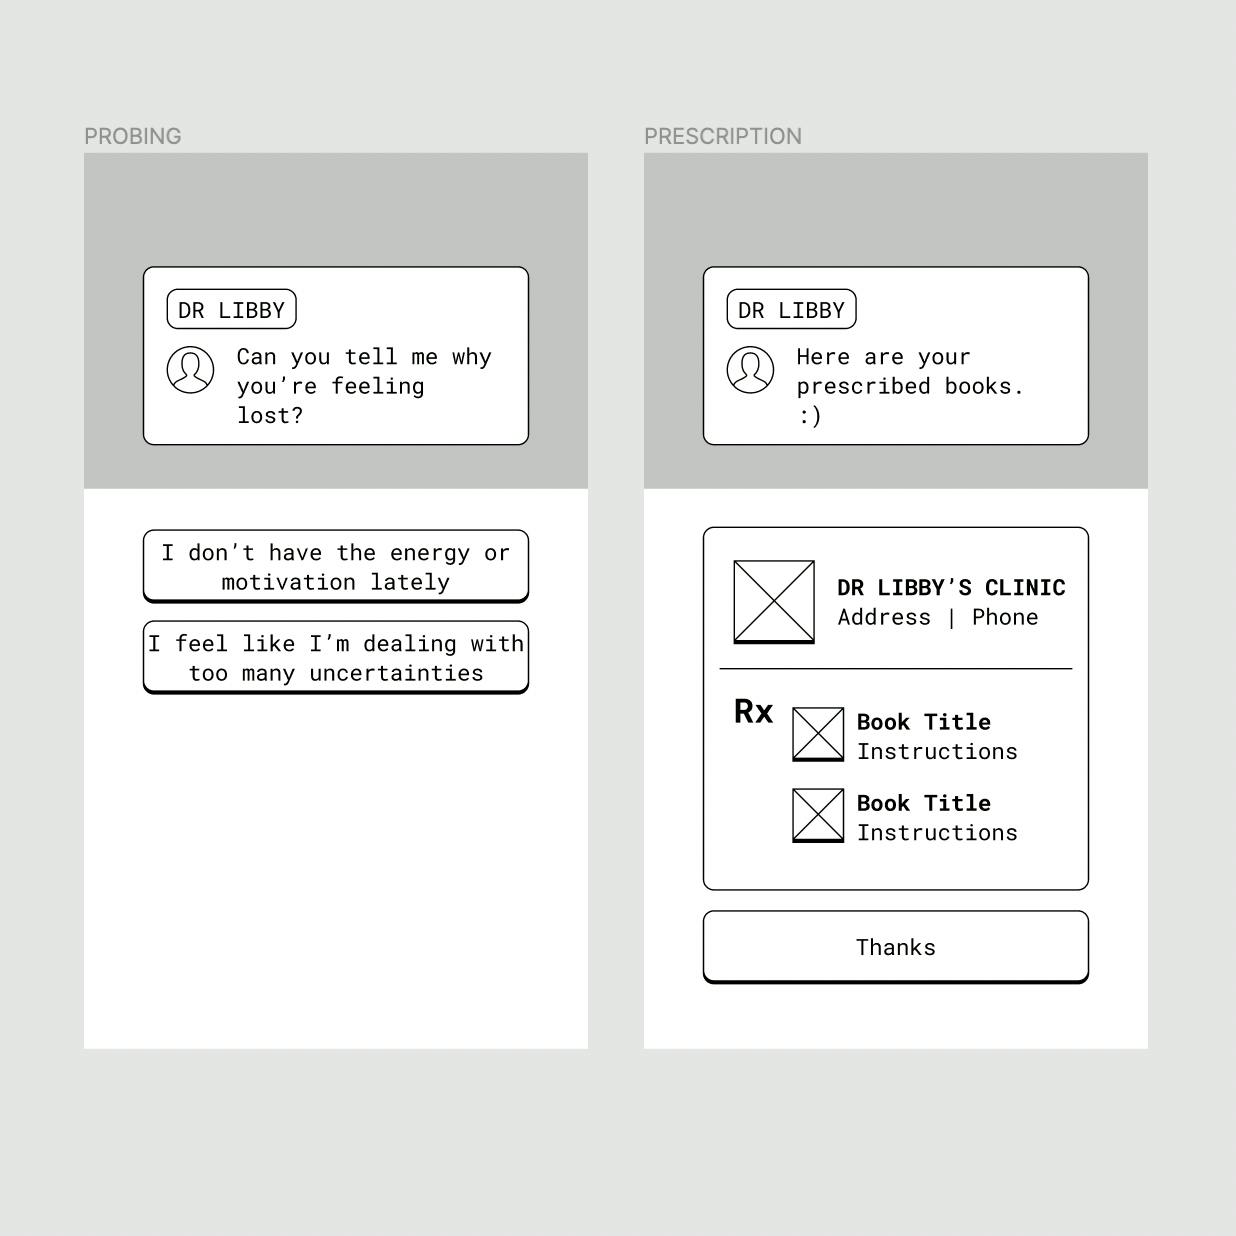 Wireframes for probing and prescription